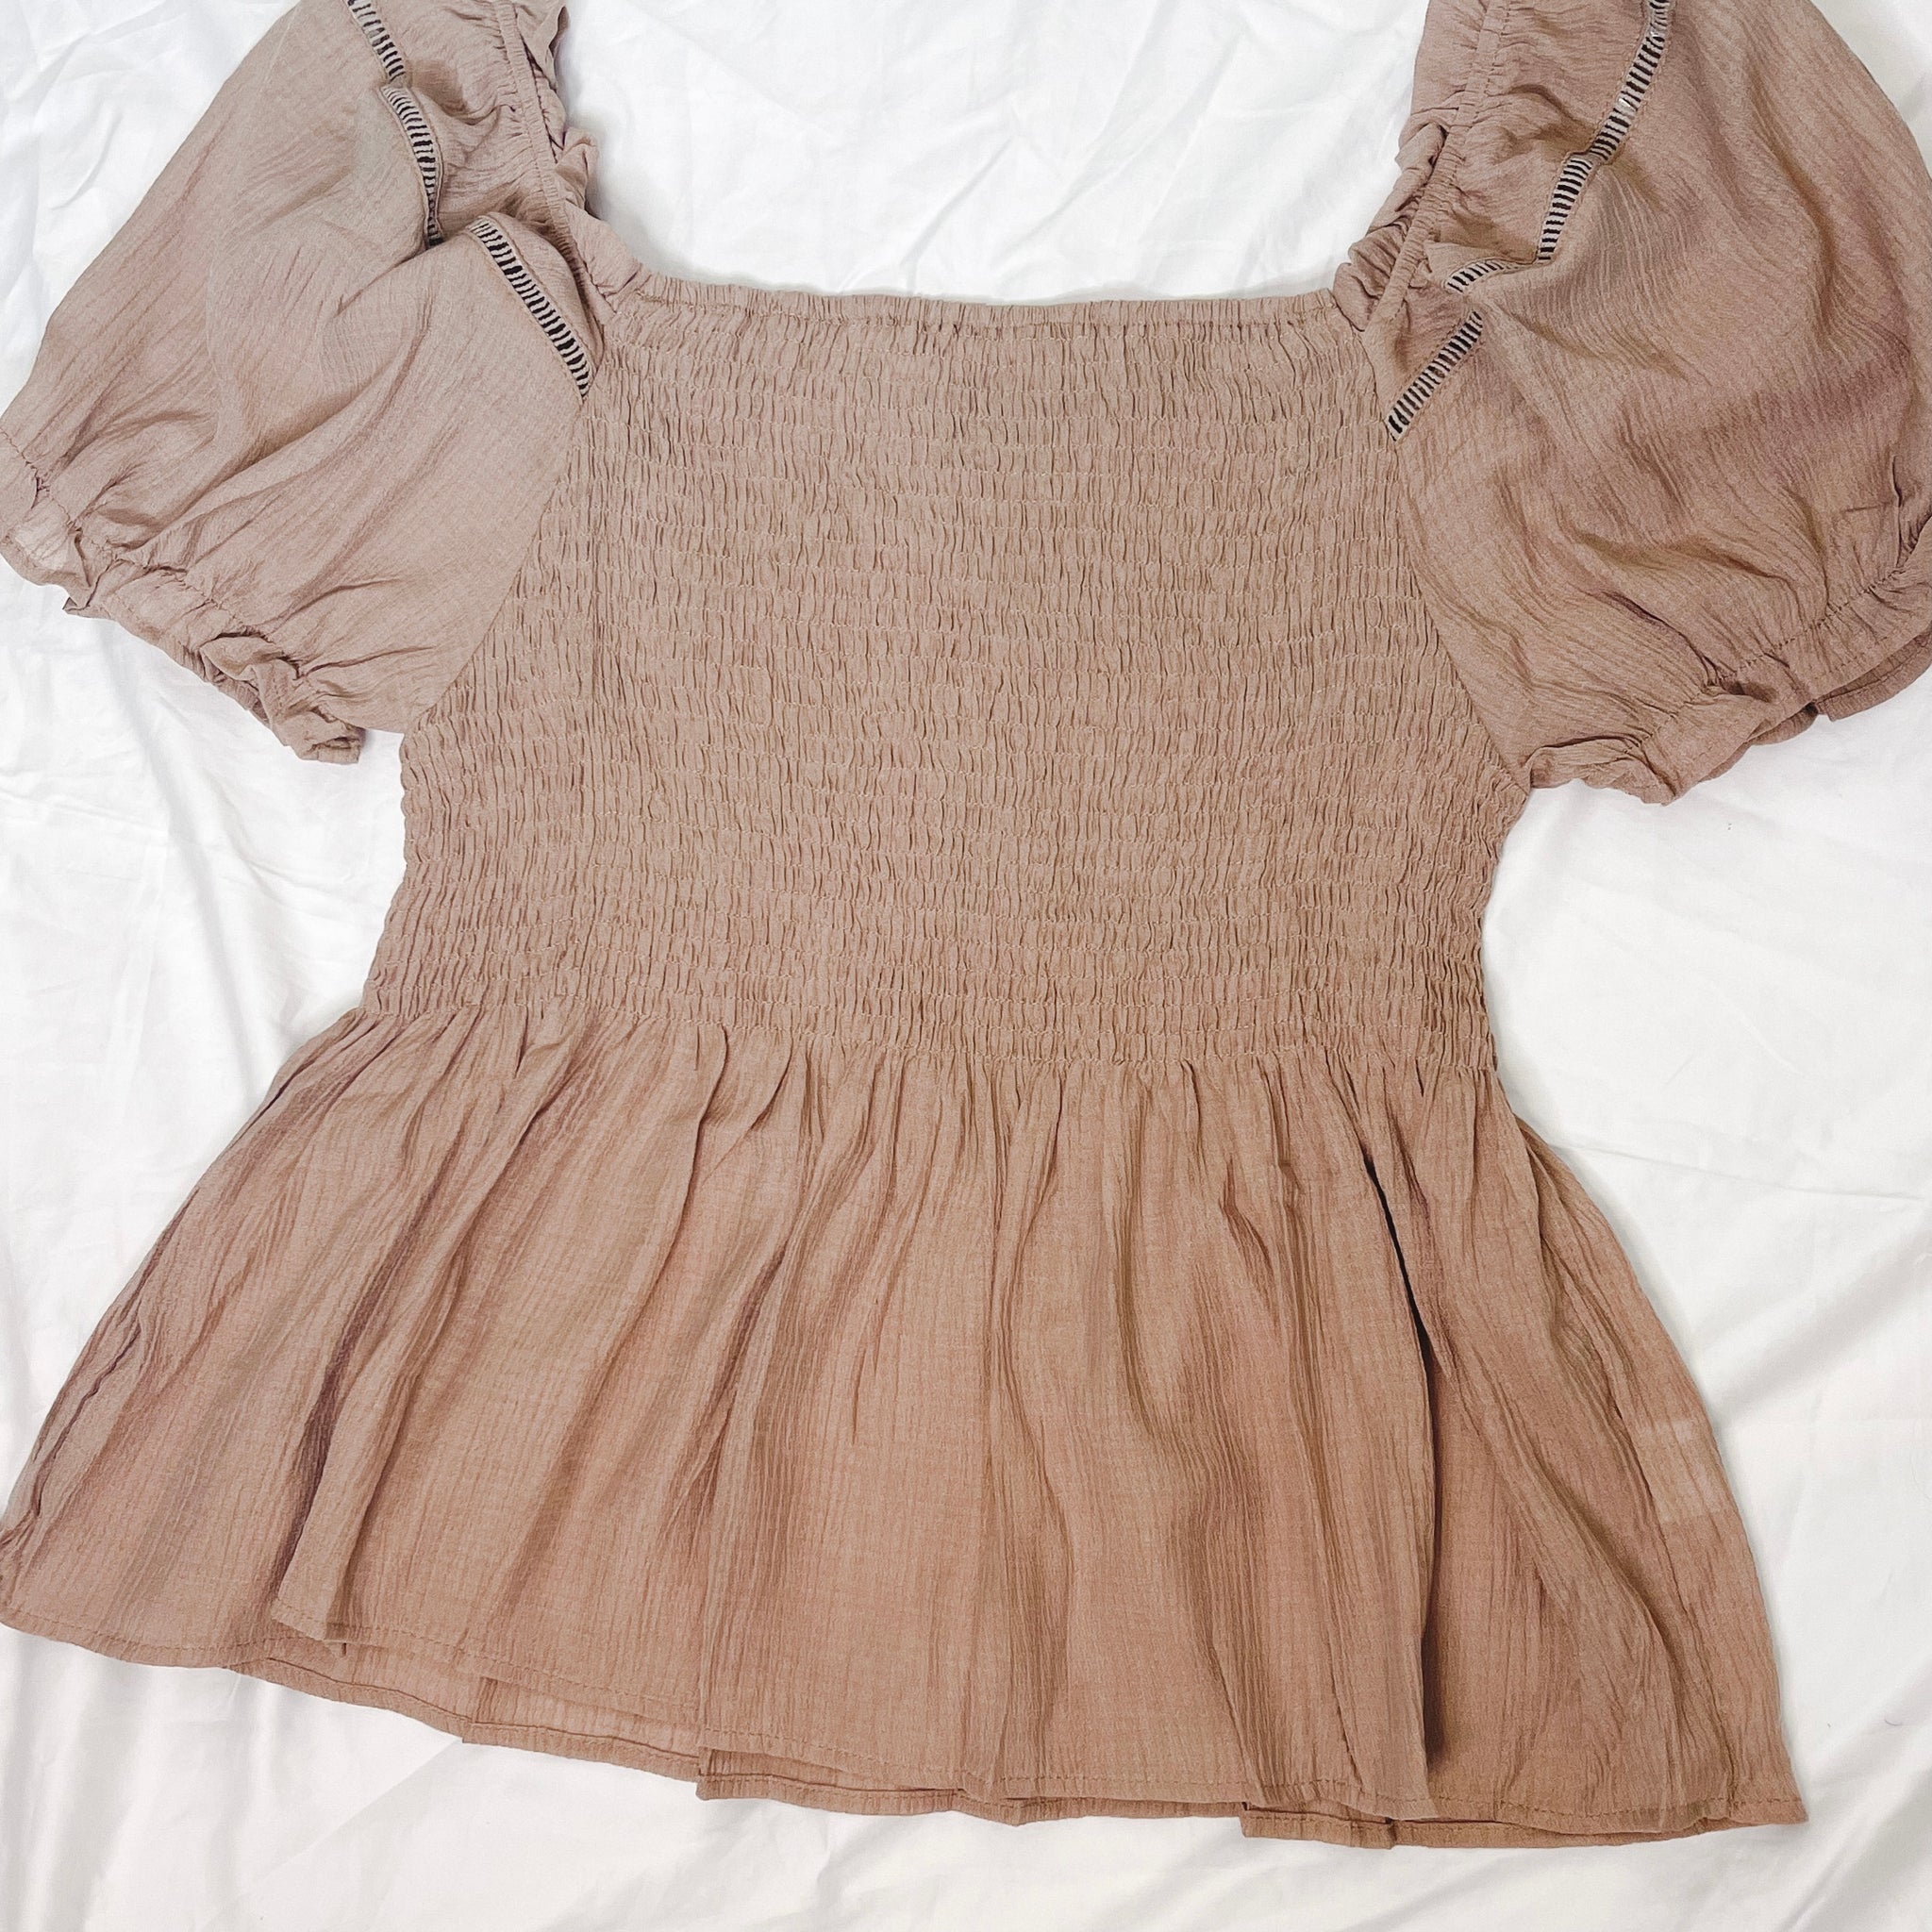 Mocha puff sleeve top with a square neckline, a shirred bodice, and a puplum style. This has a very nice stretch to it & is sheer material where it flares out under the bust. 